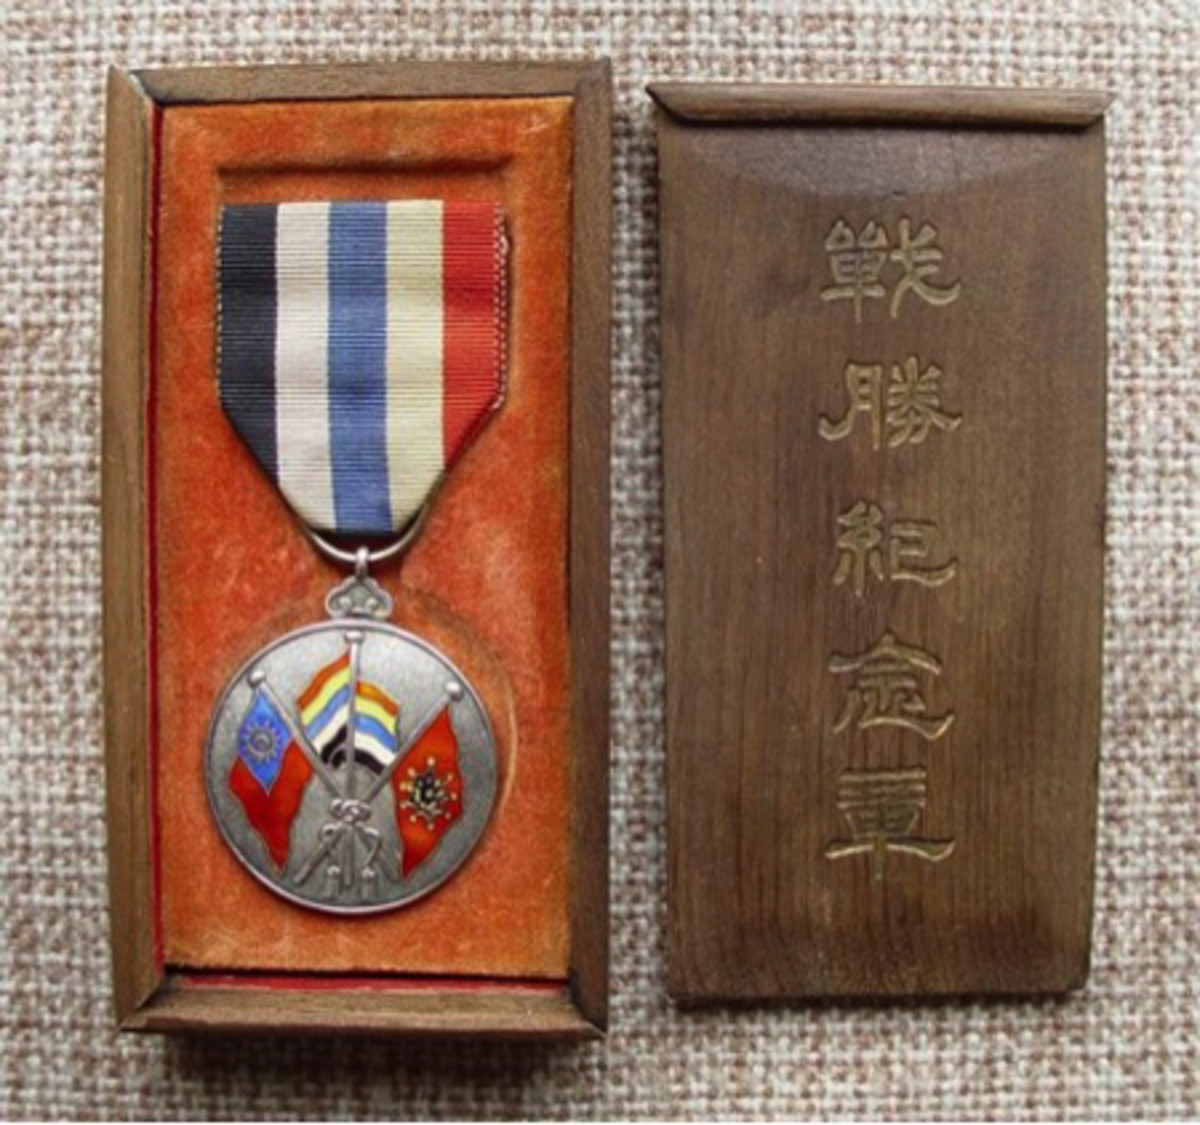  China - World War One Victory Medal in original case